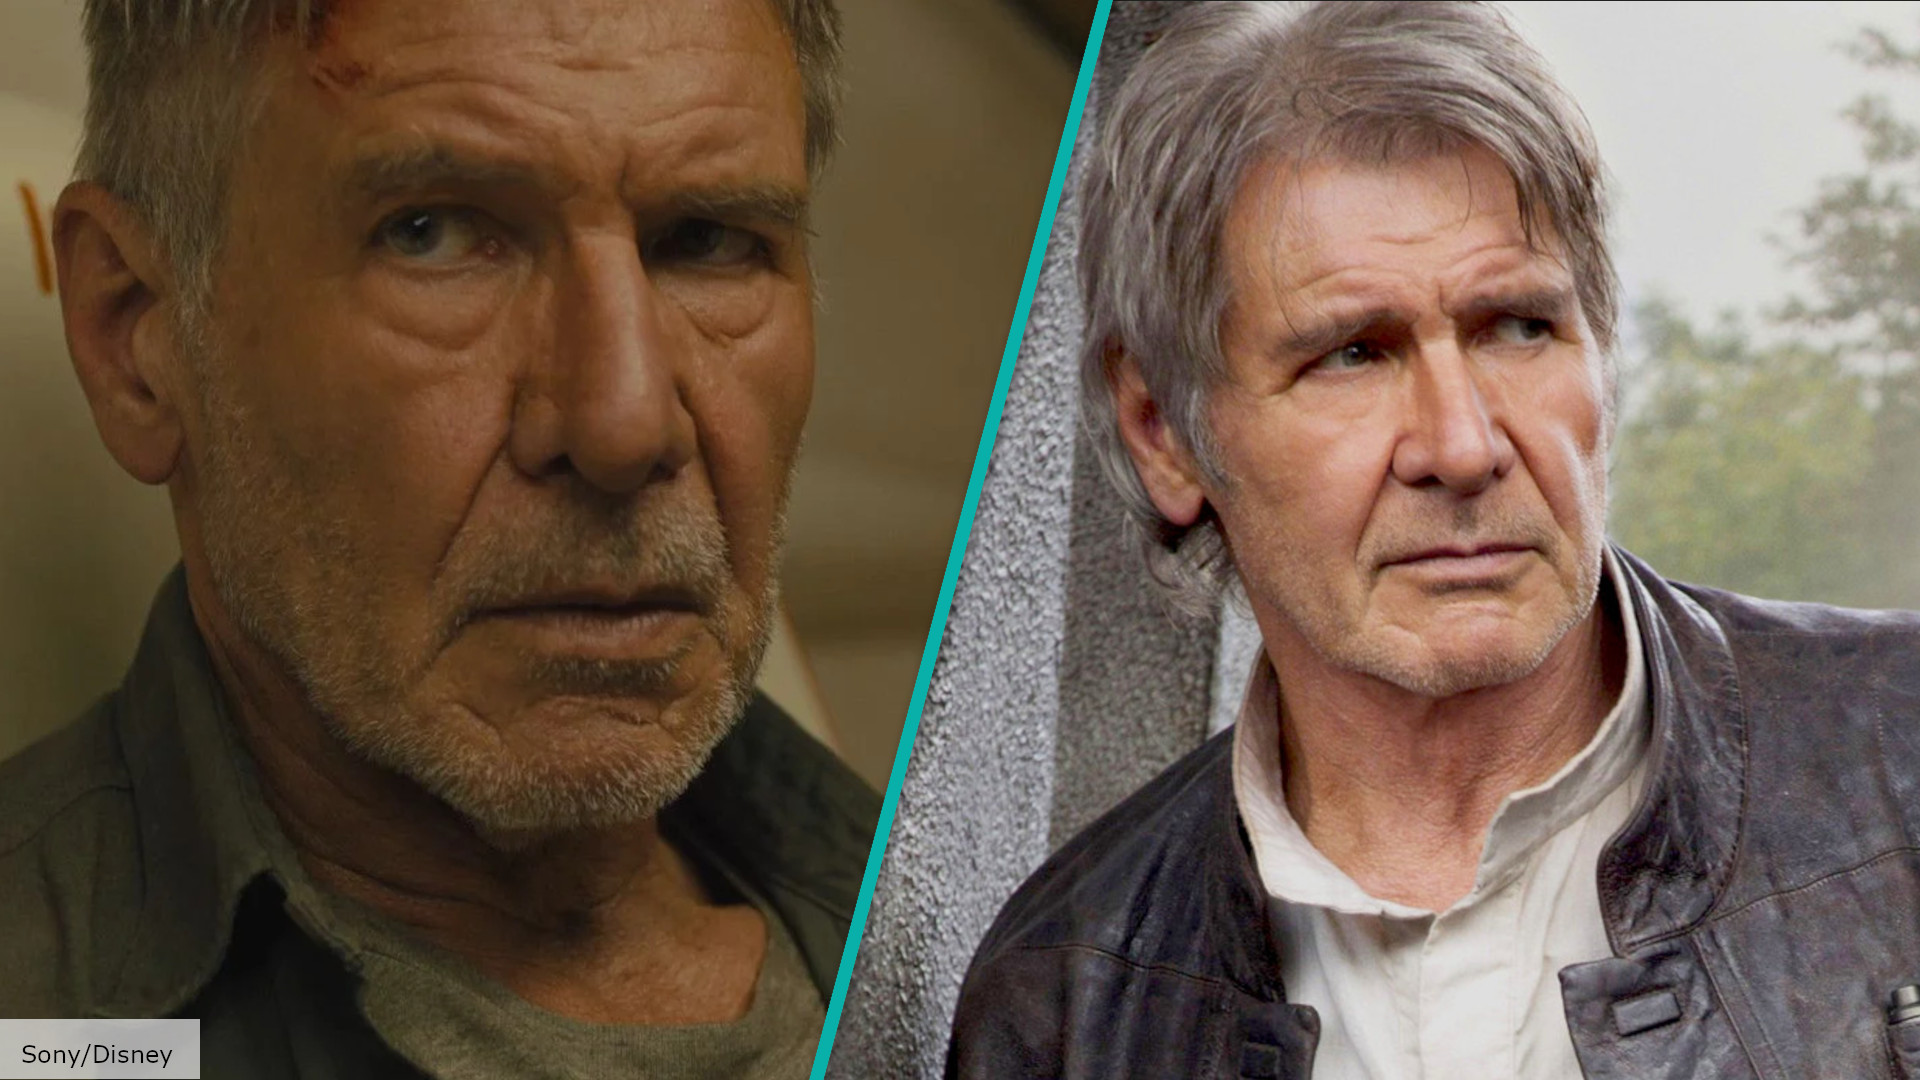 Harrison Ford to star in his first TV series